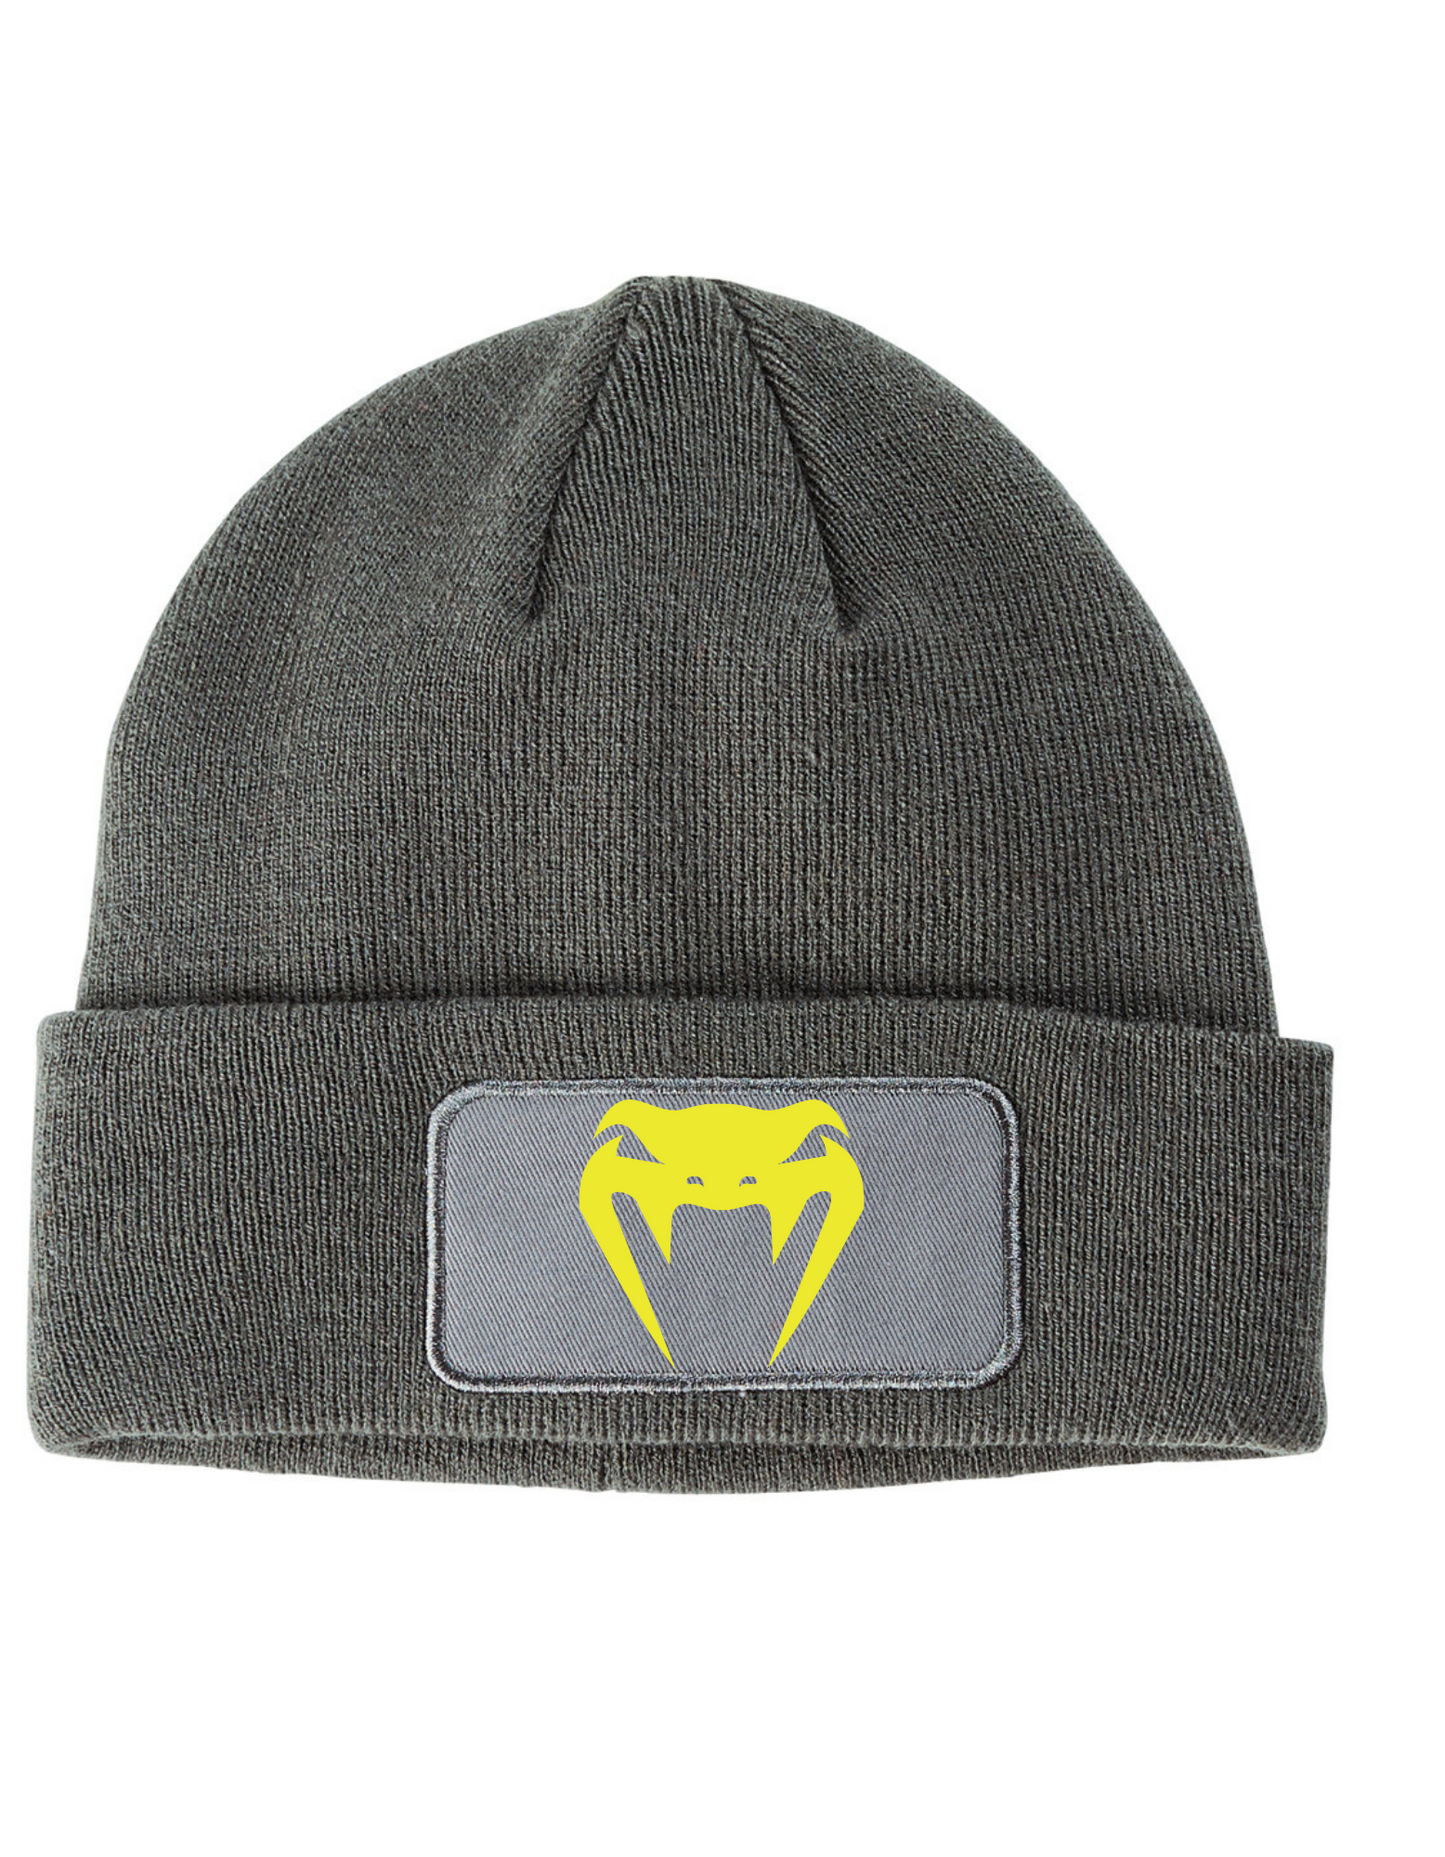 Patched Beanie